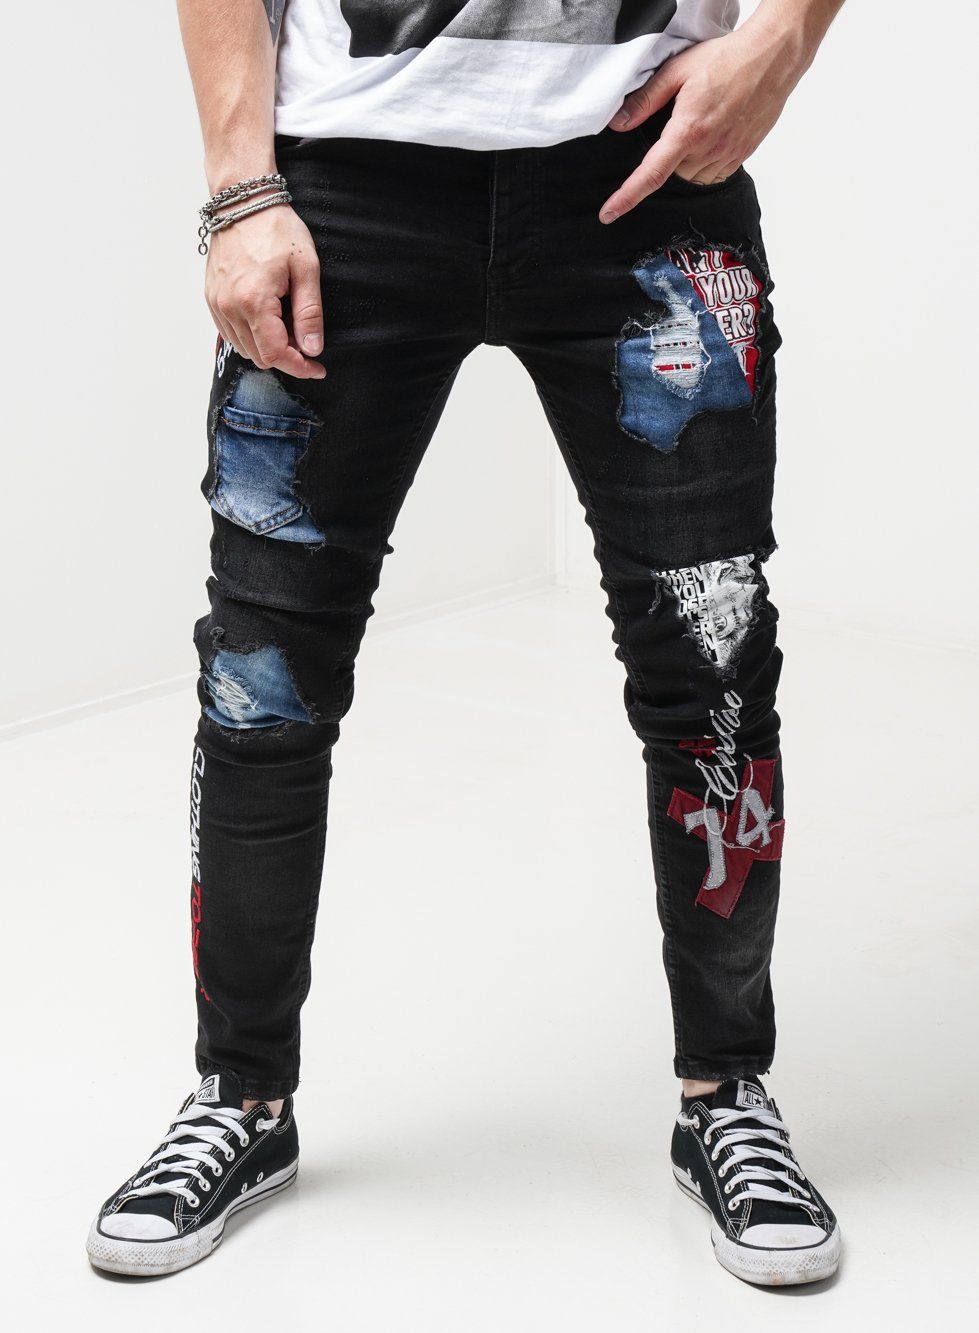 A man wearing INSIDER ripped jeans.